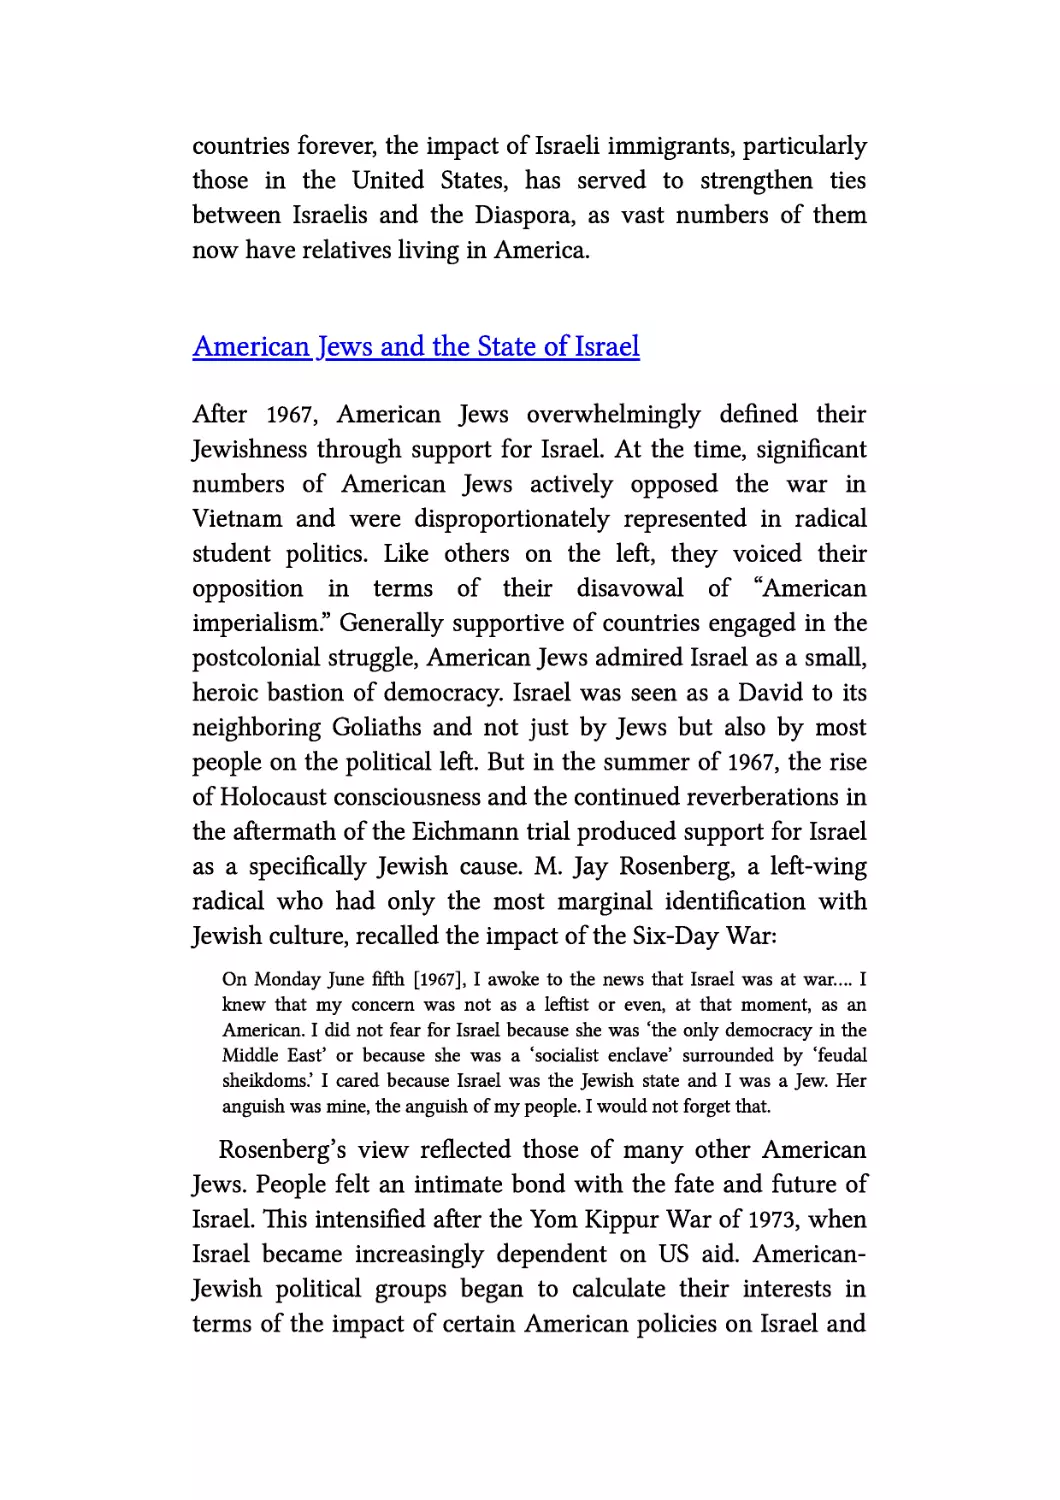 American Jews and the State of Israel